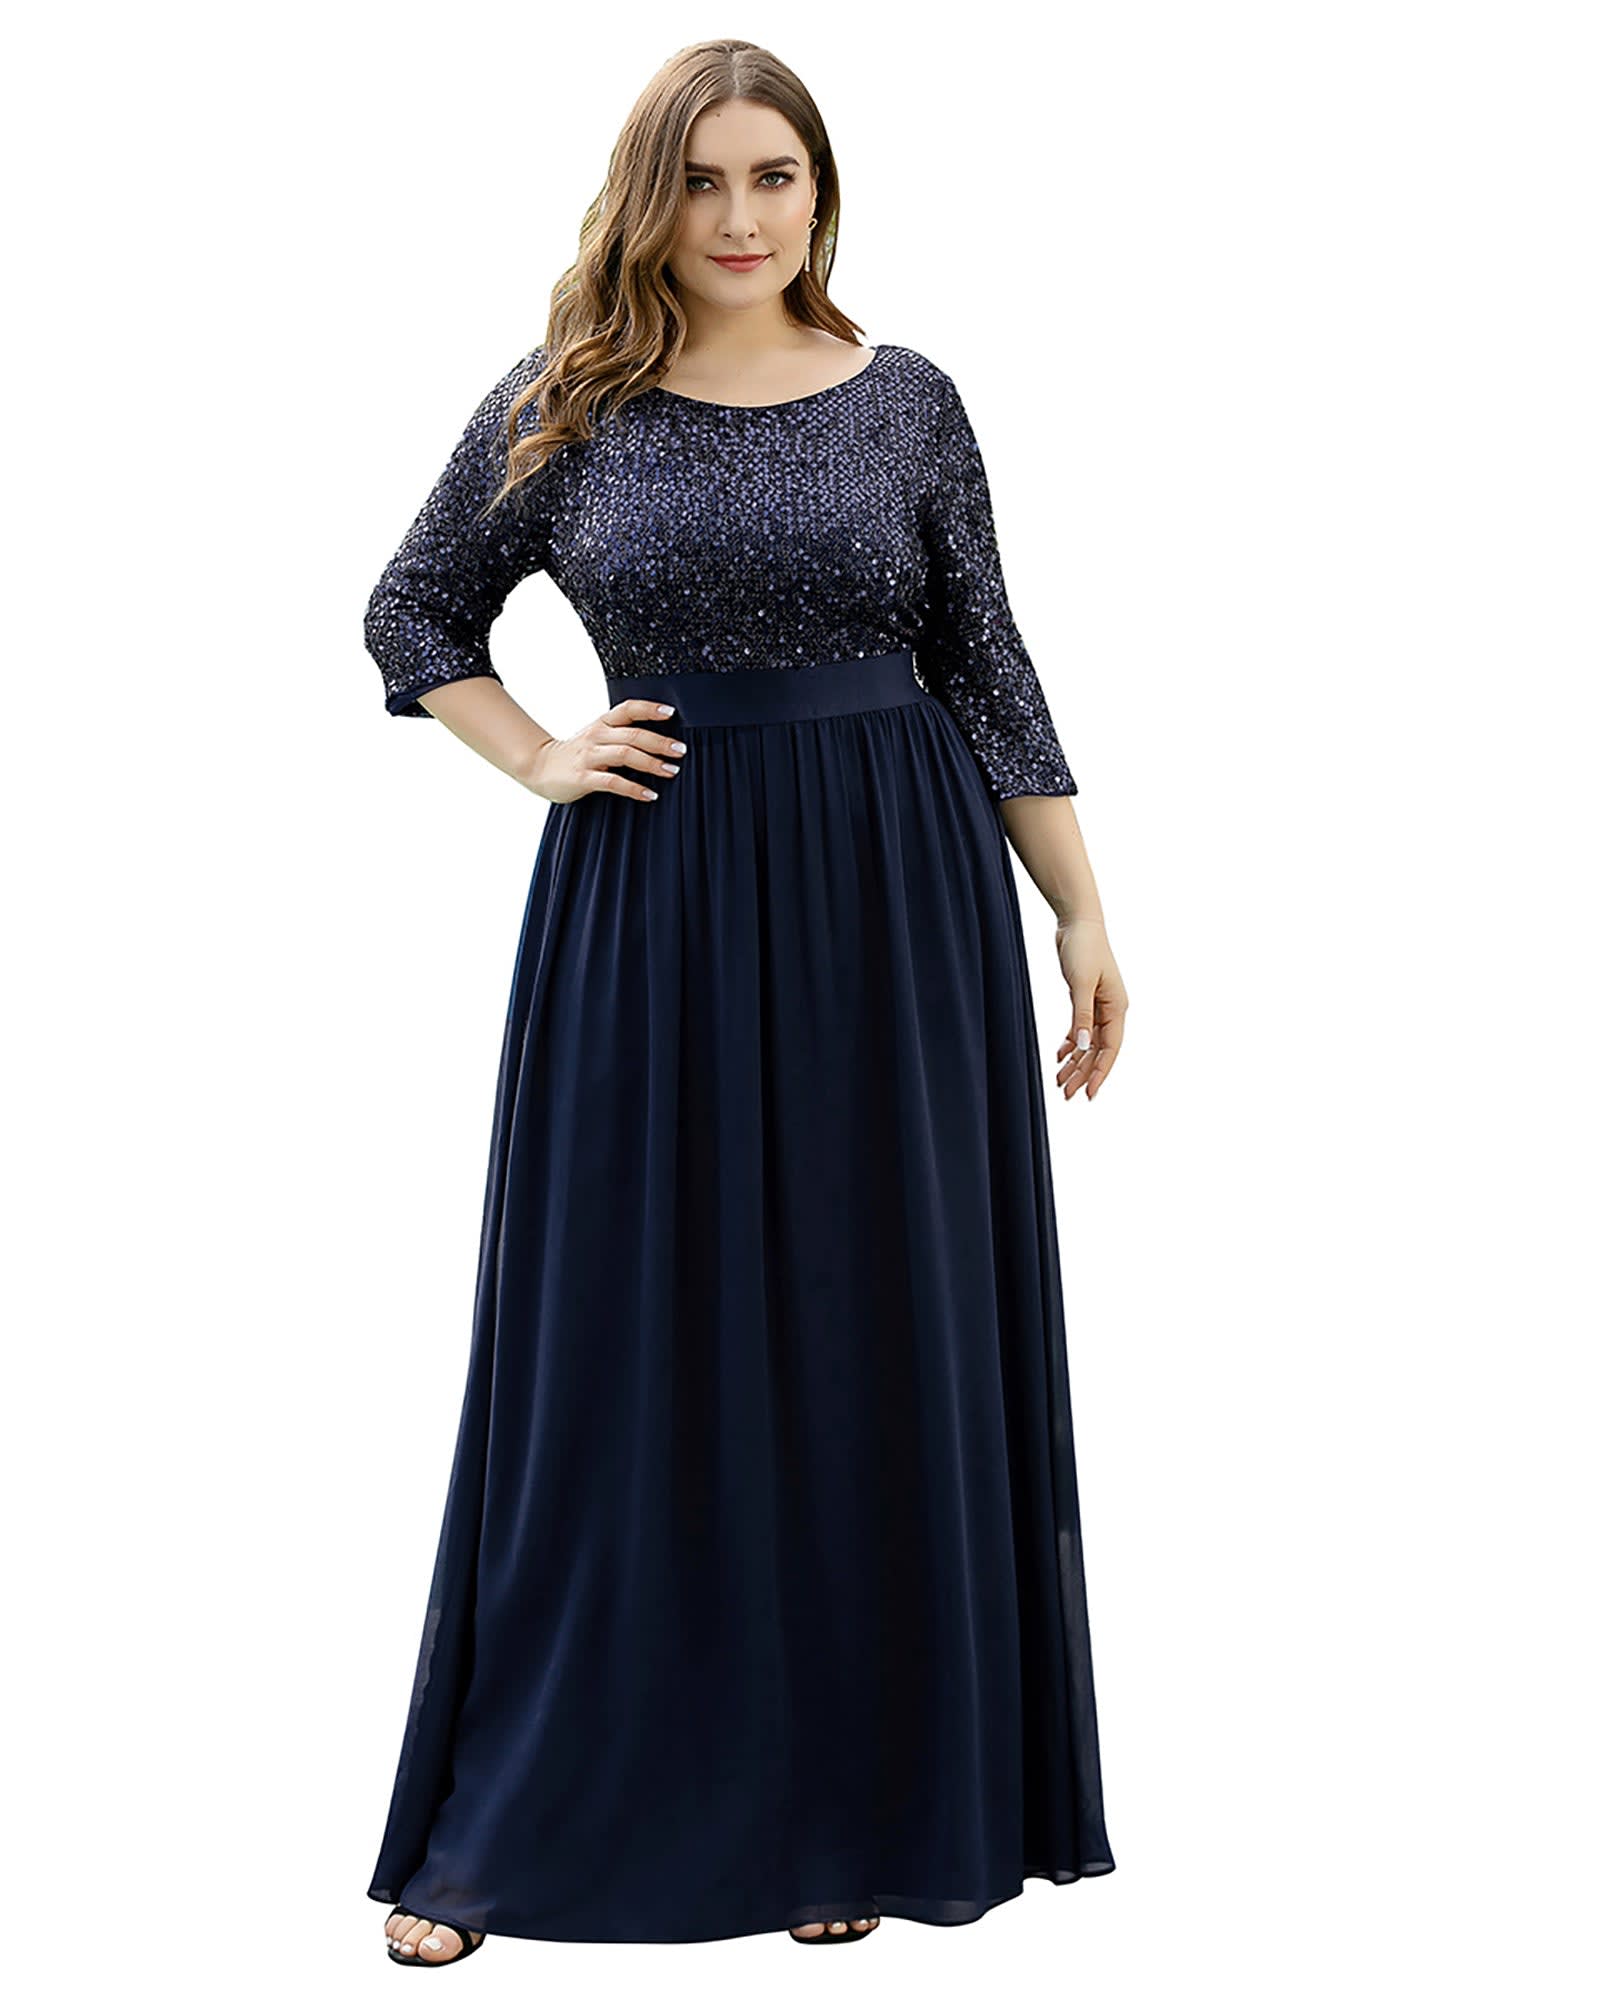 3/4 Sleeves Round Neck Evening Dress With Sequin Bodice | Navy Blue